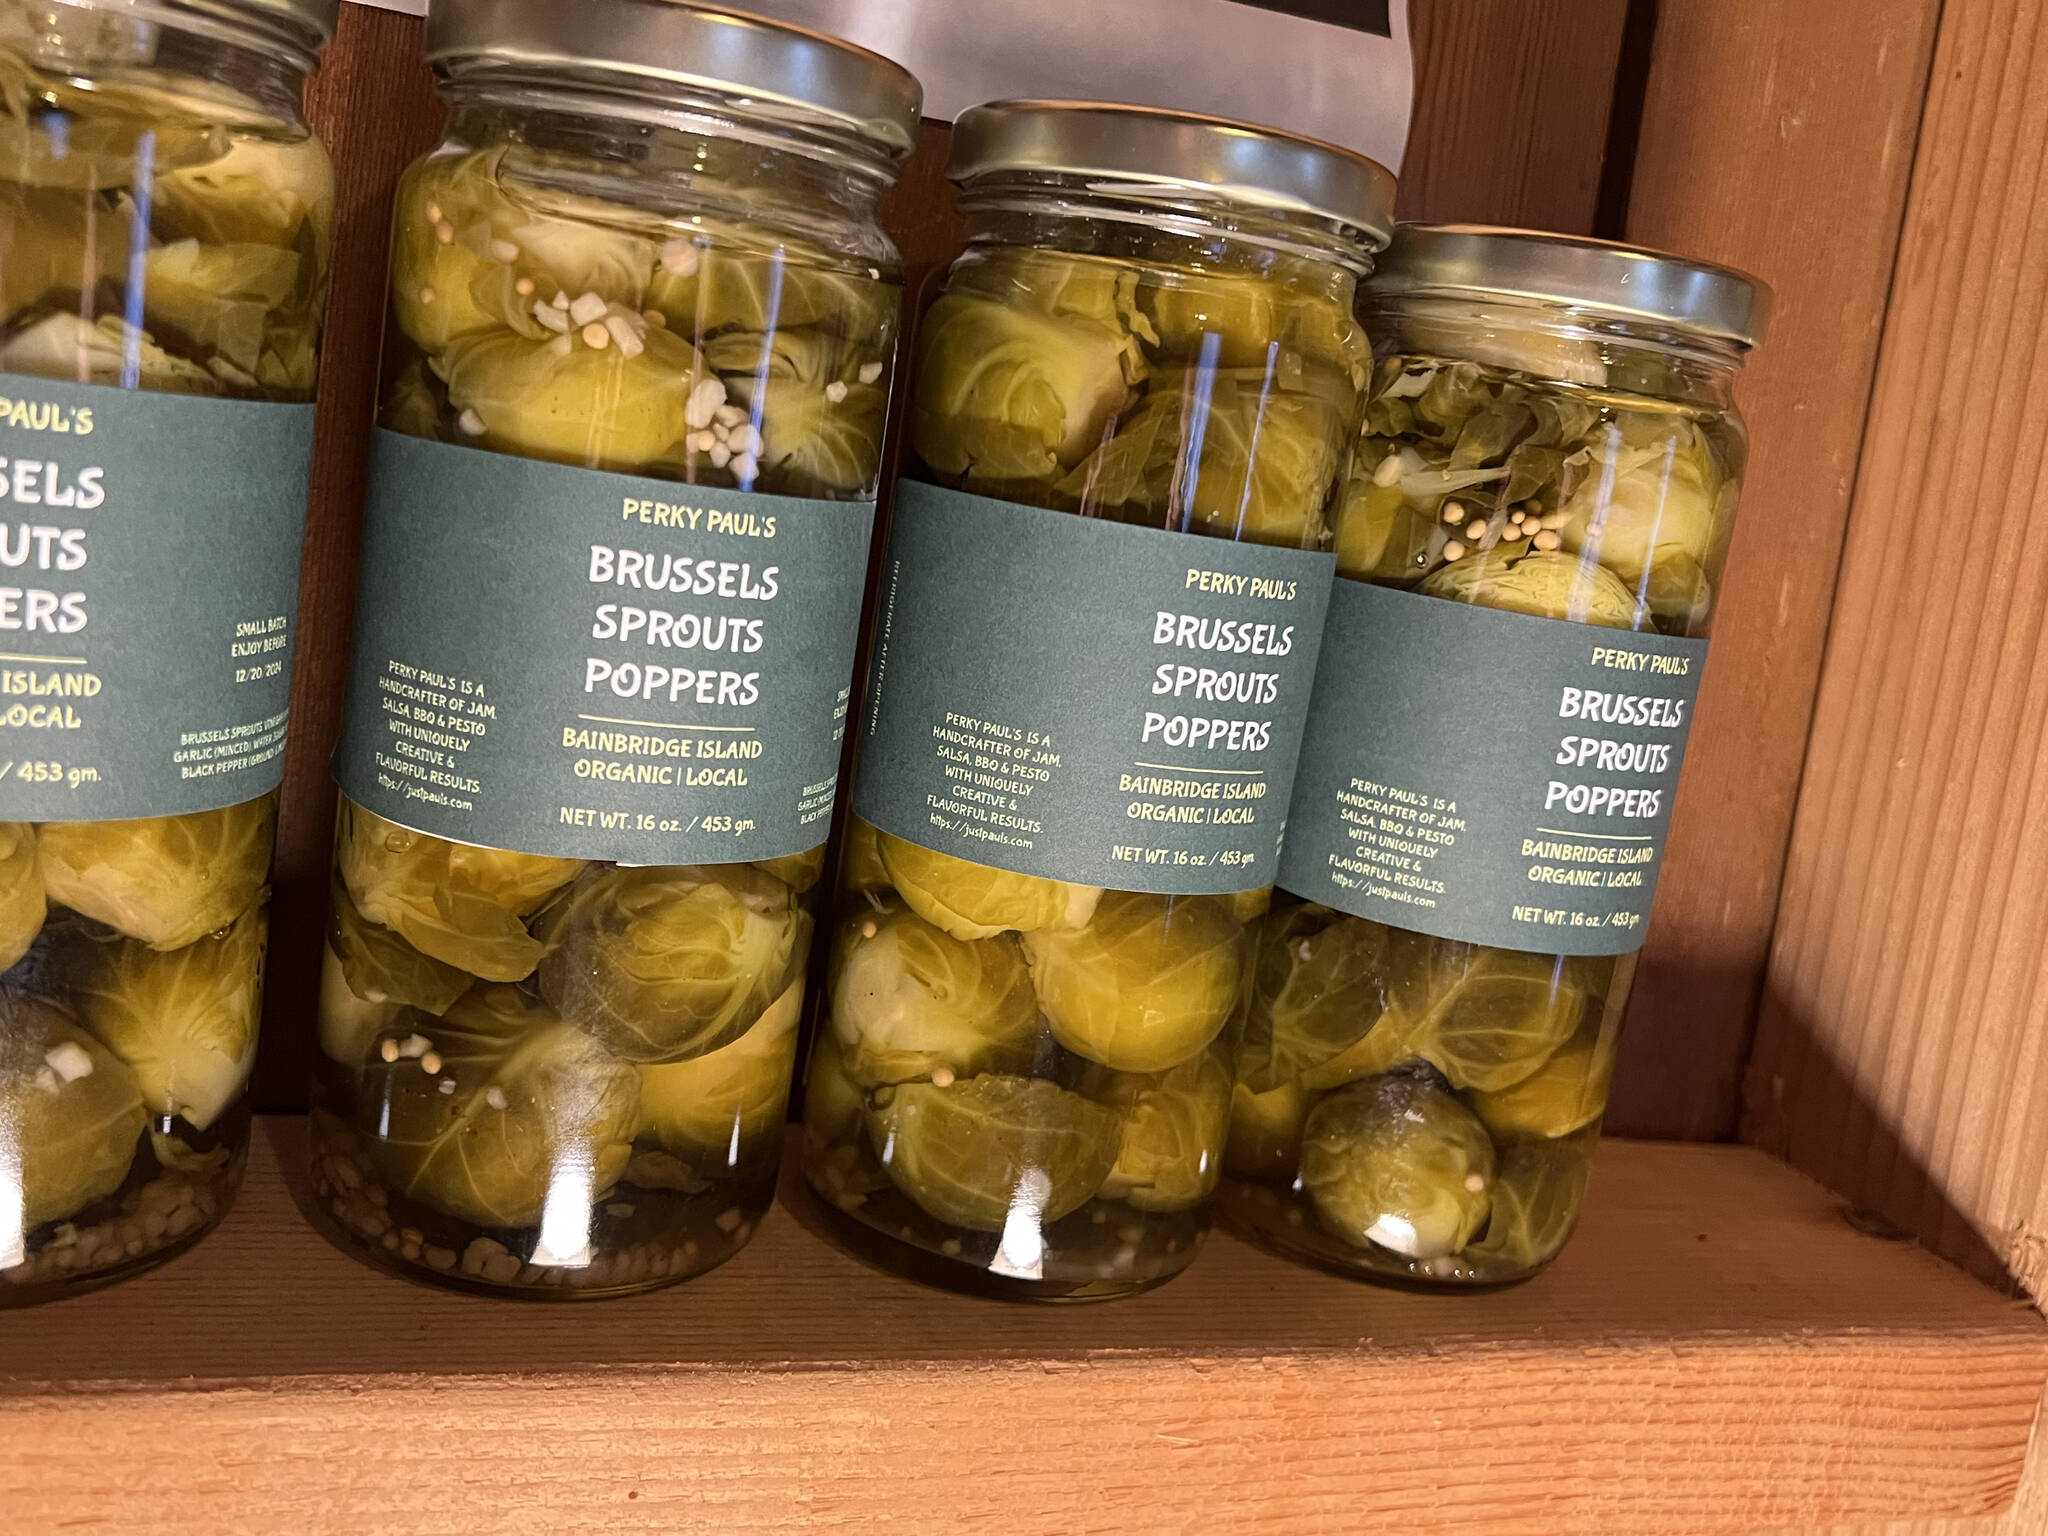 Perky Paul’s pickled Brussels Sprouts are a fan favorite.